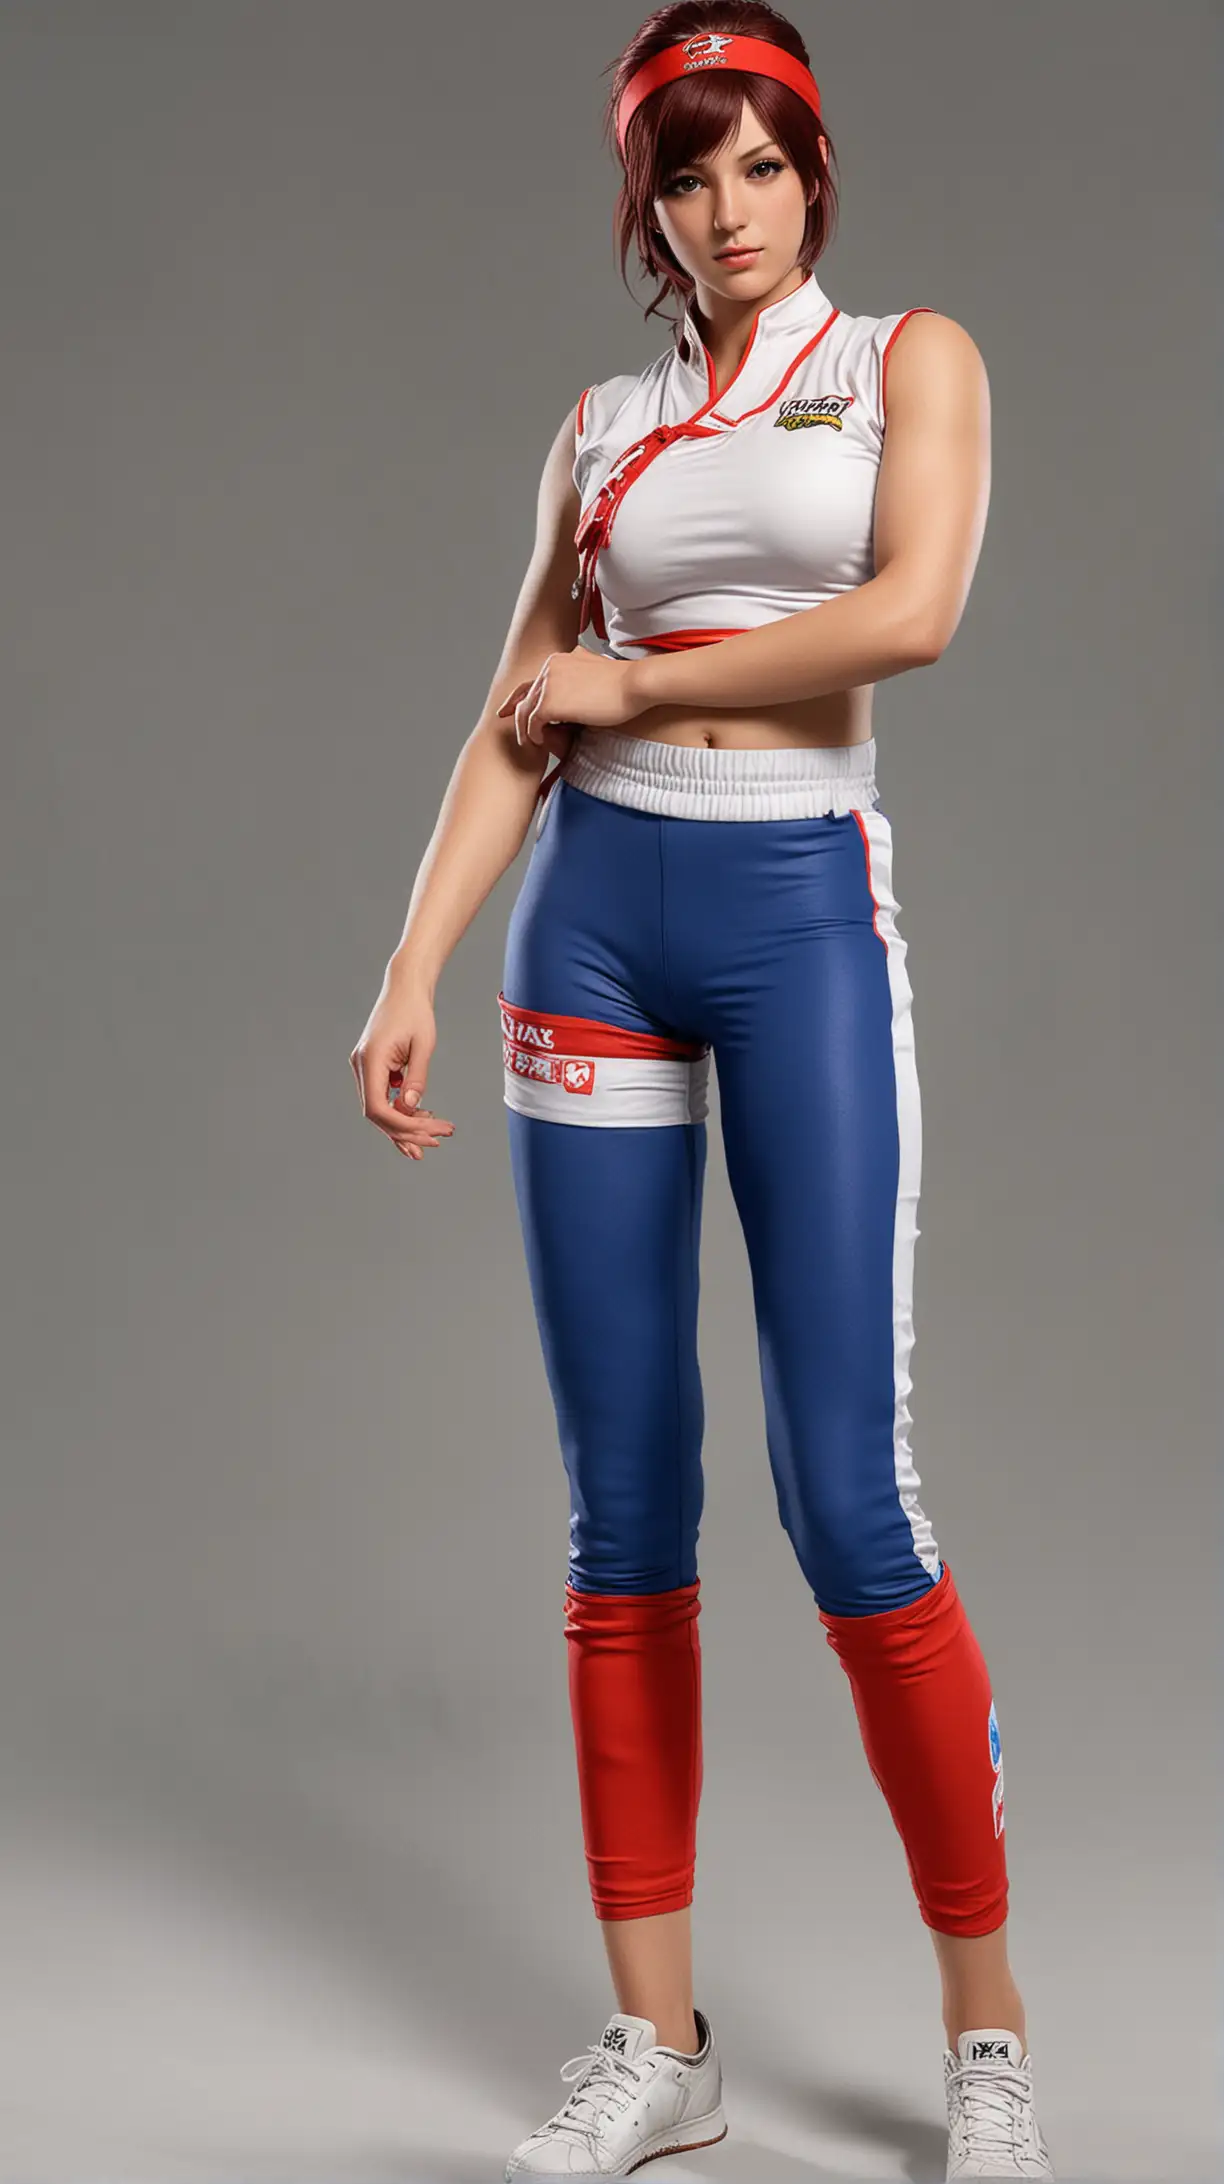 Japanese Female Karate Fighter with Red Headband in Blue Leggings